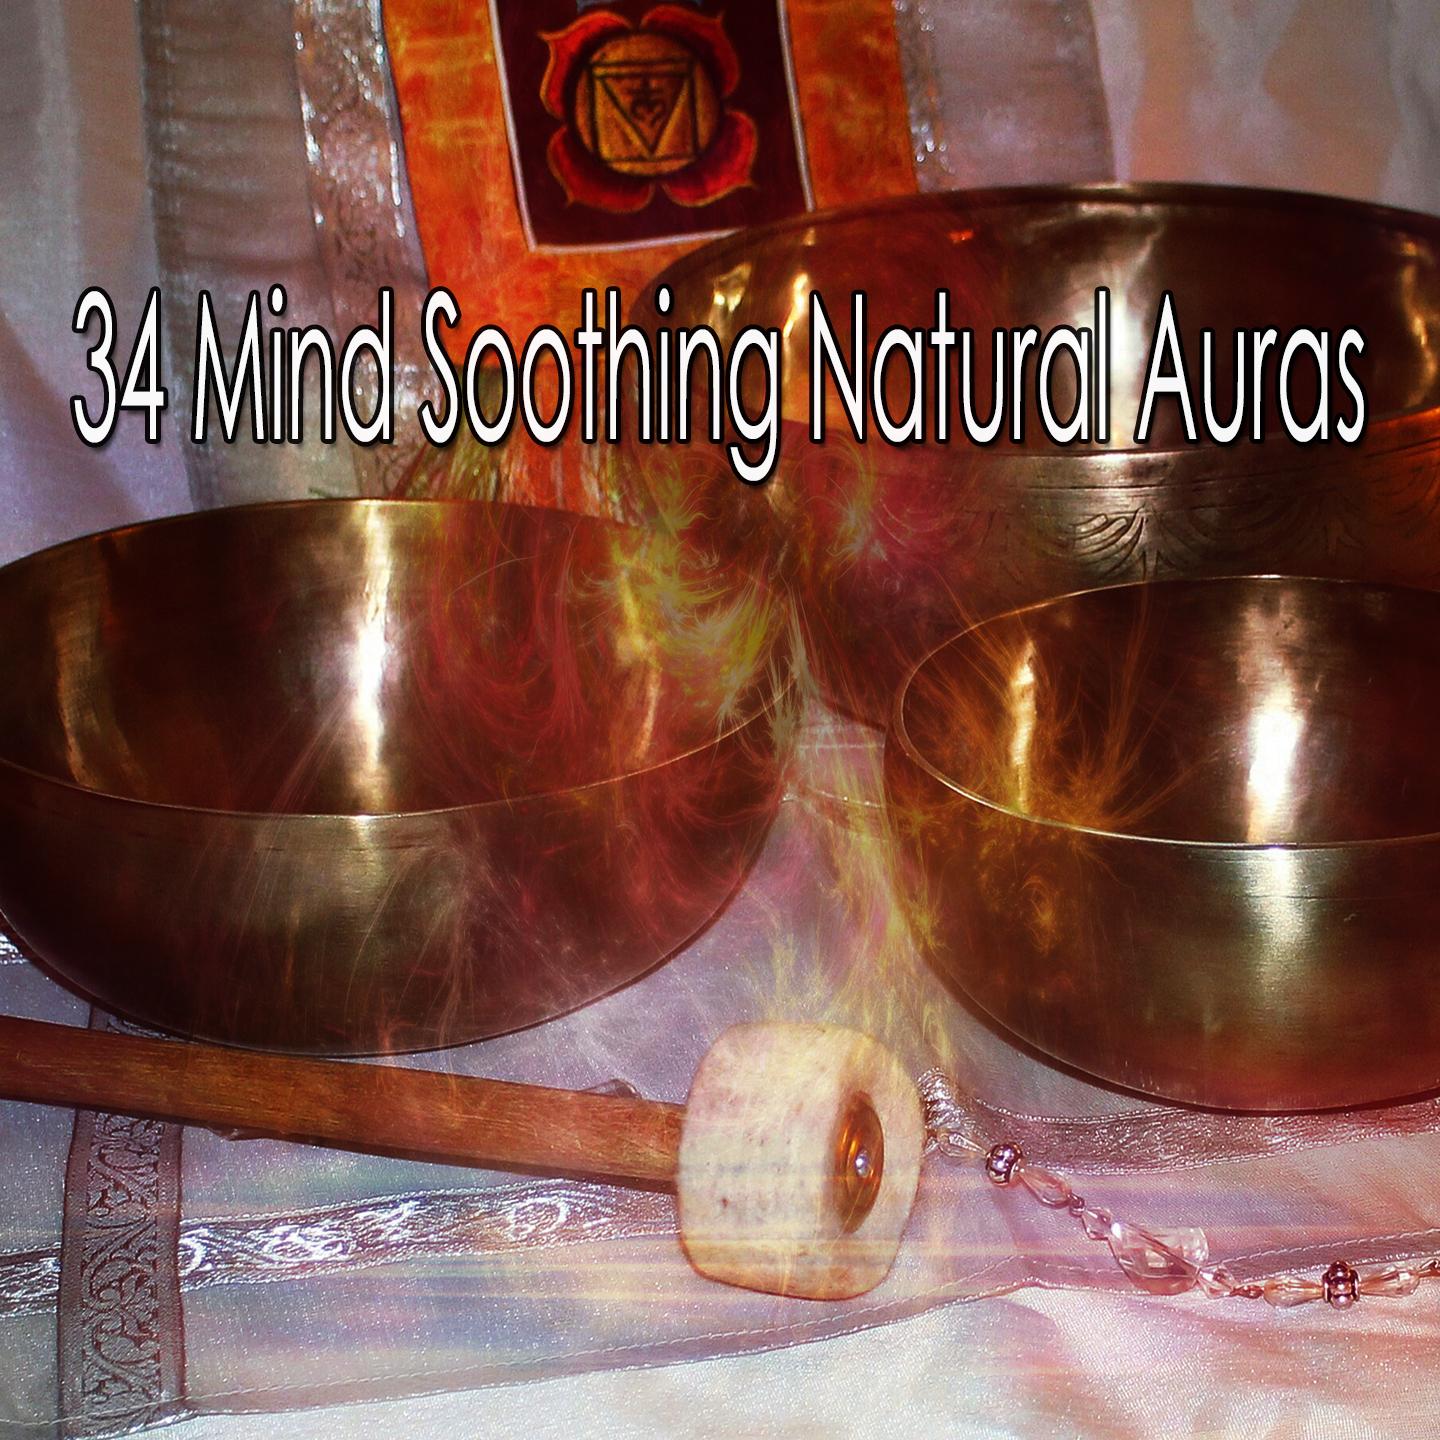 34 Mind Soothing Natural Auras